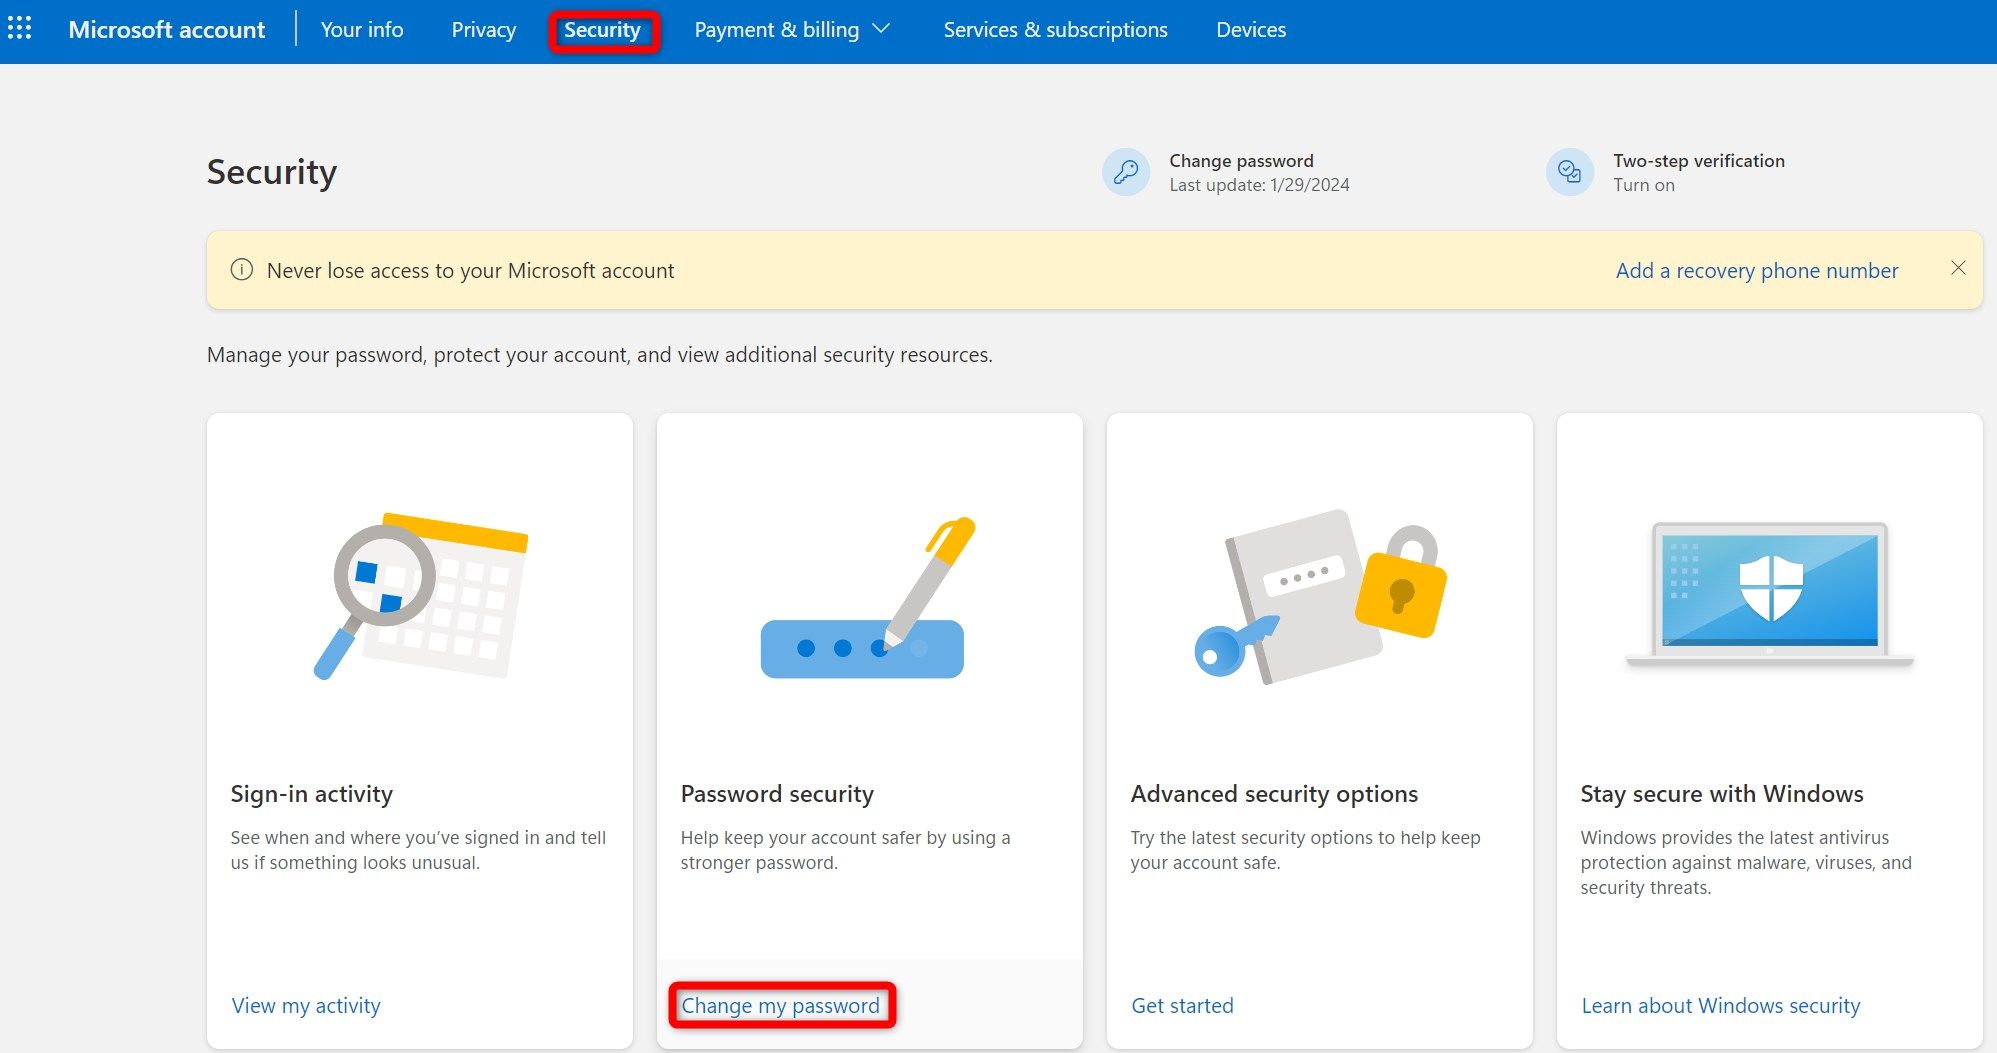 Opening the password security settings to change the Microsoft Accont password.